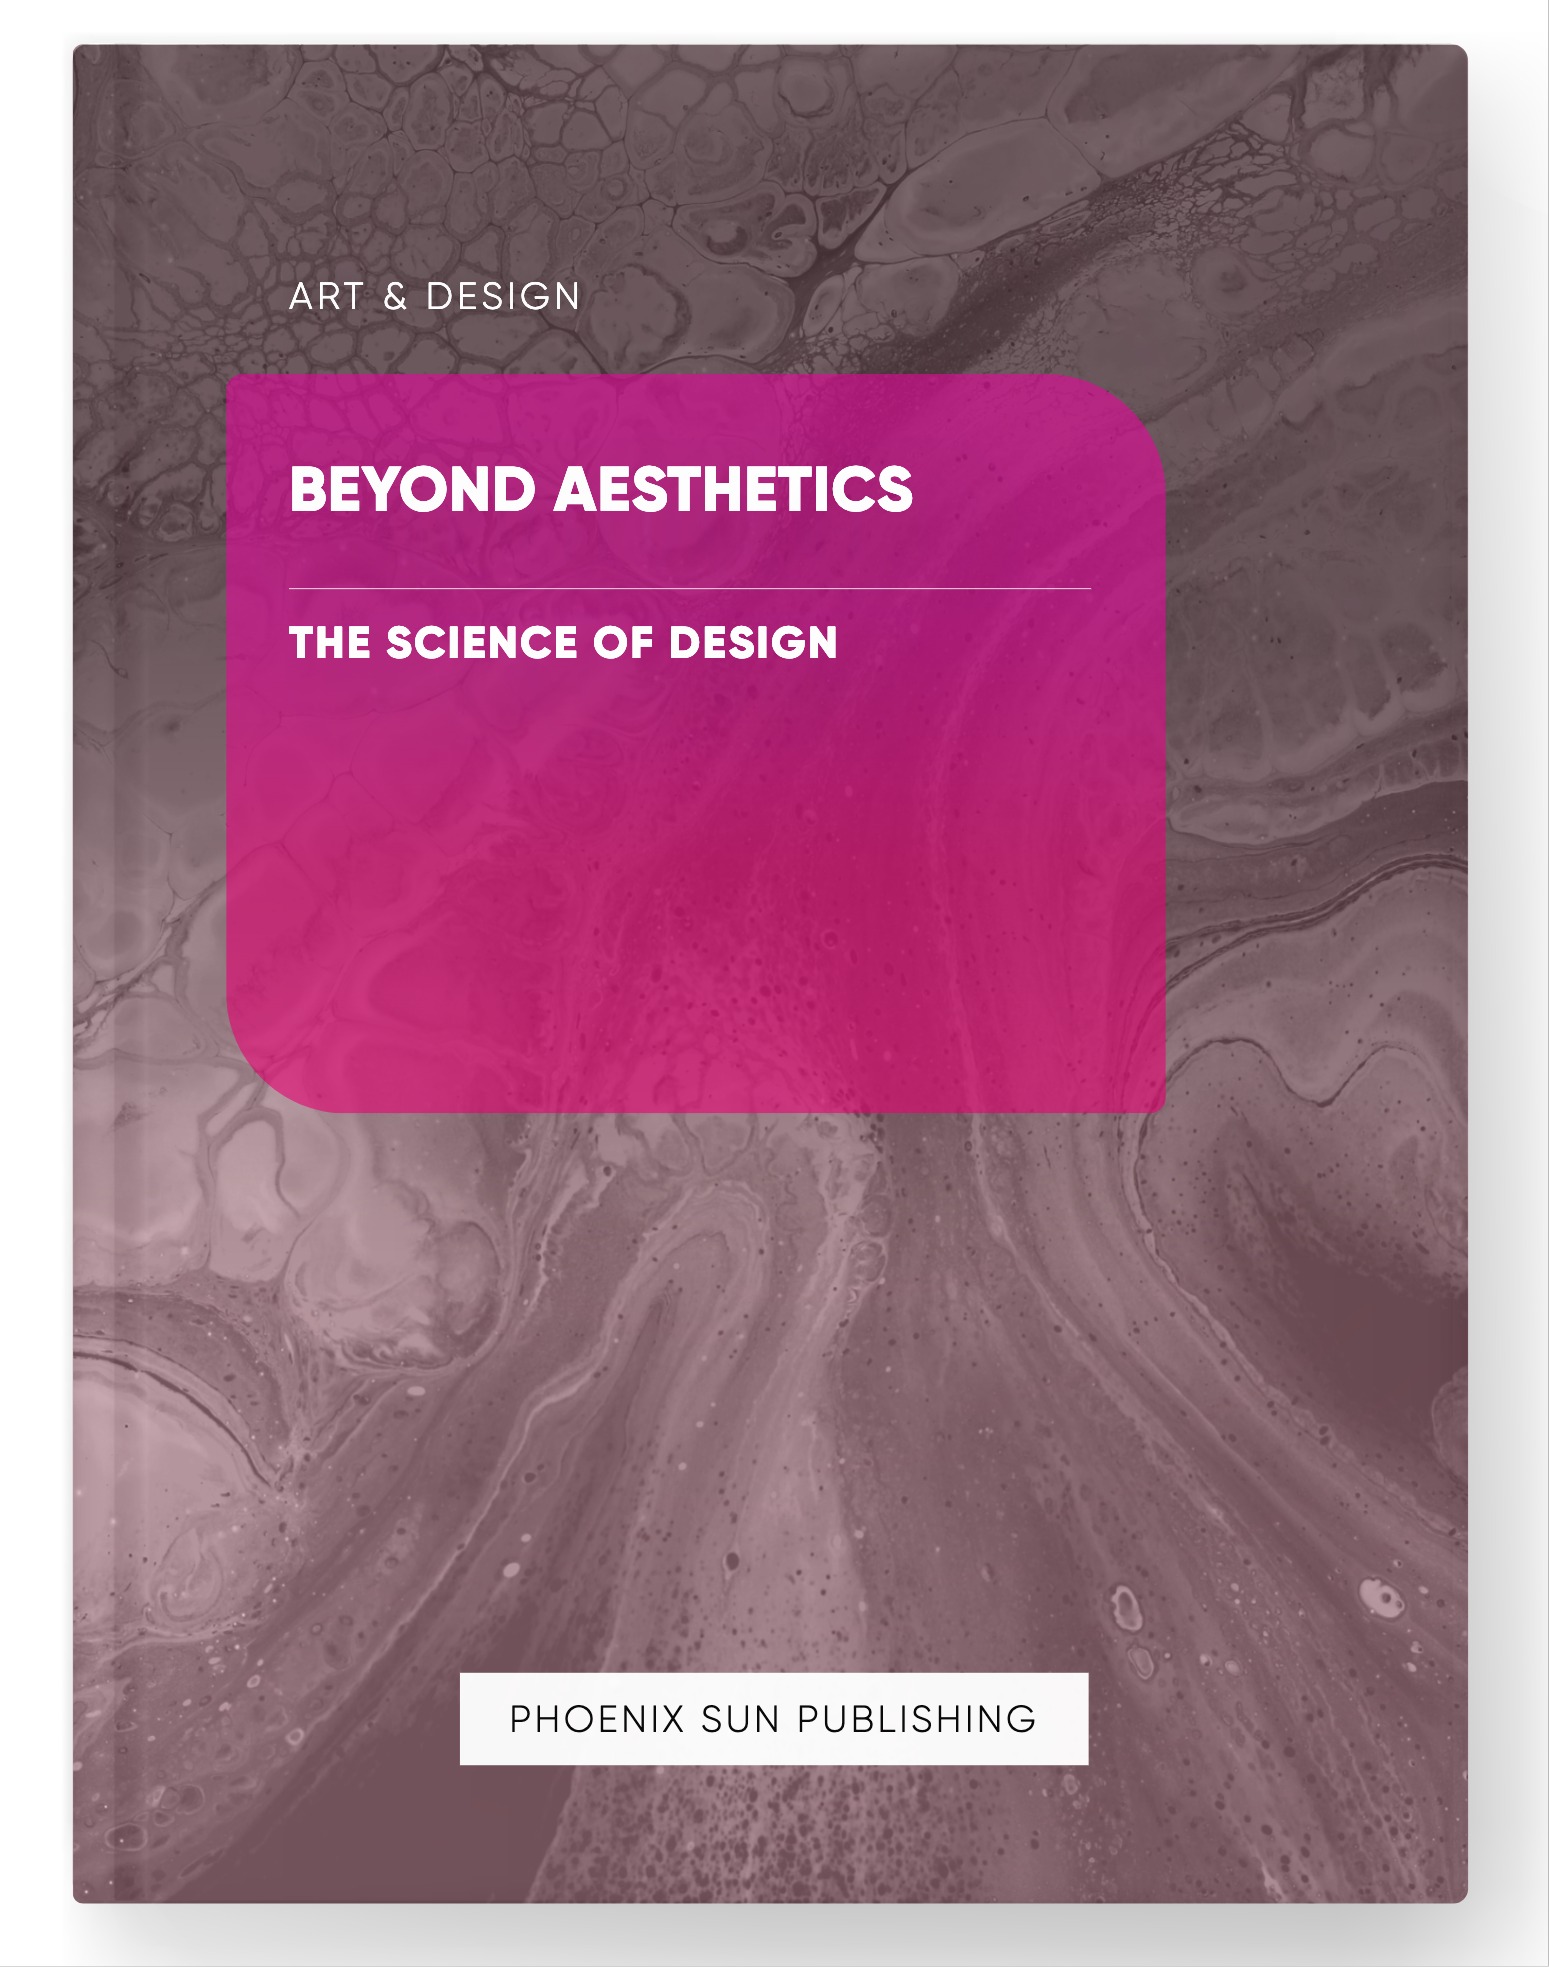 Beyond Aesthetics – The Science of Design